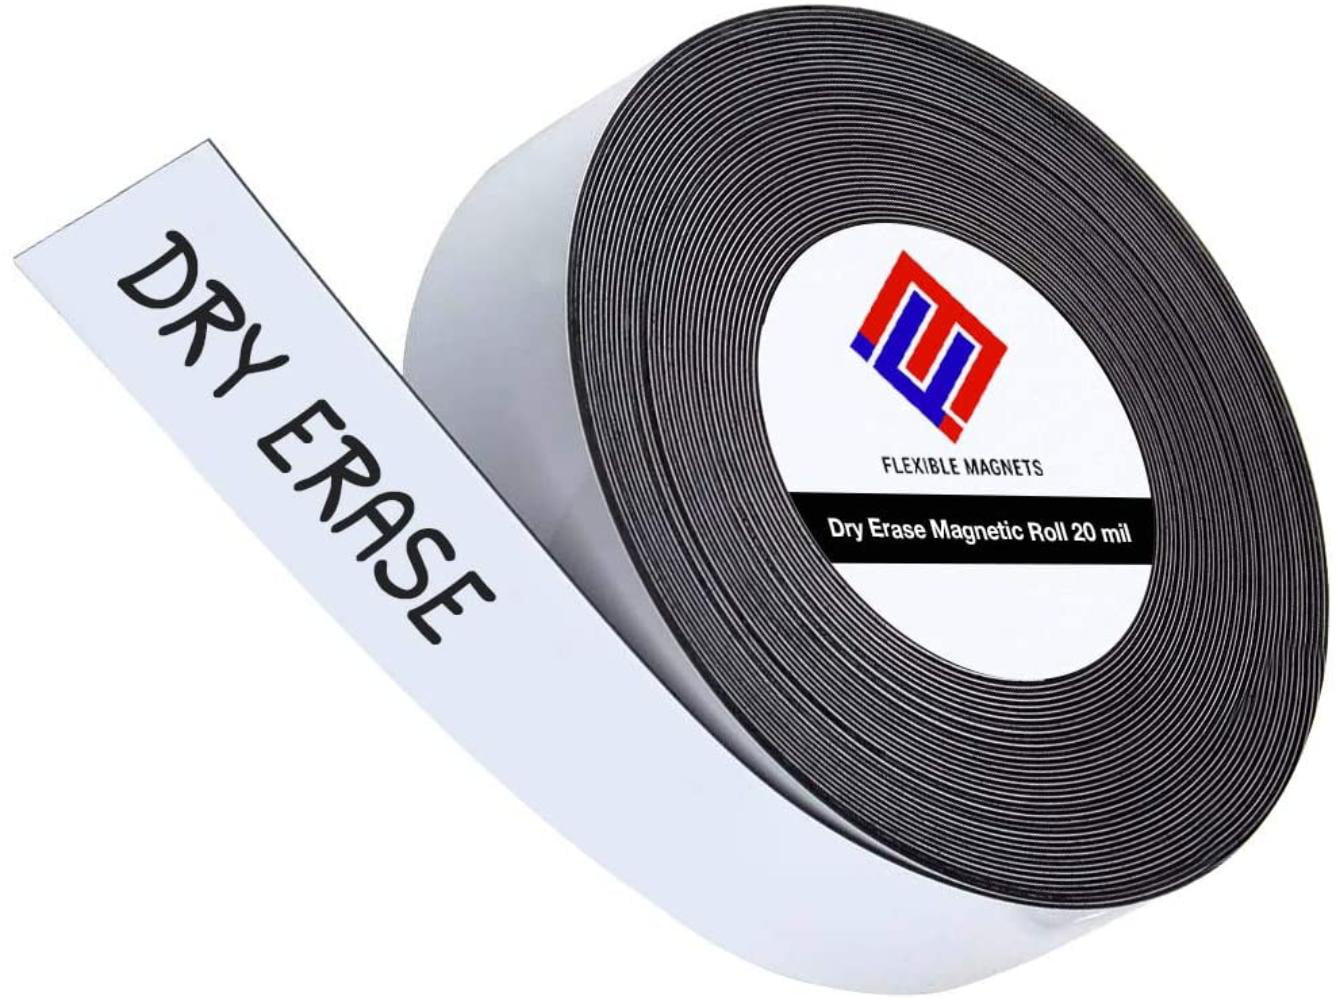 Red Dry Erase Magnetic Strip Roll 1" x 10' Write on Wipe off Magnet Magnets 